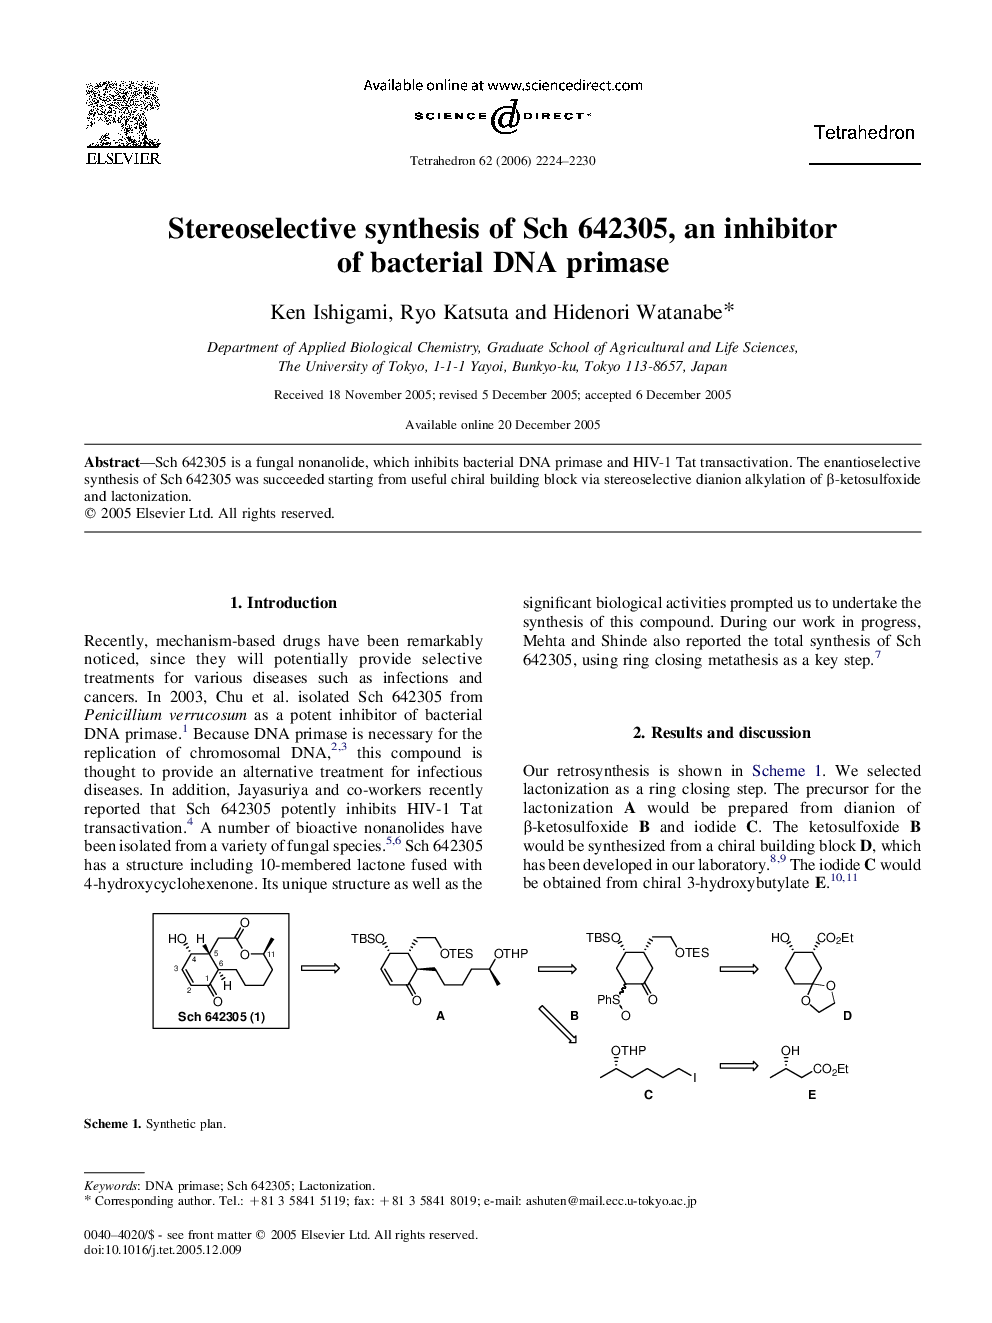 Stereoselective synthesis of Sch 642305, an inhibitor of bacterial DNA primase